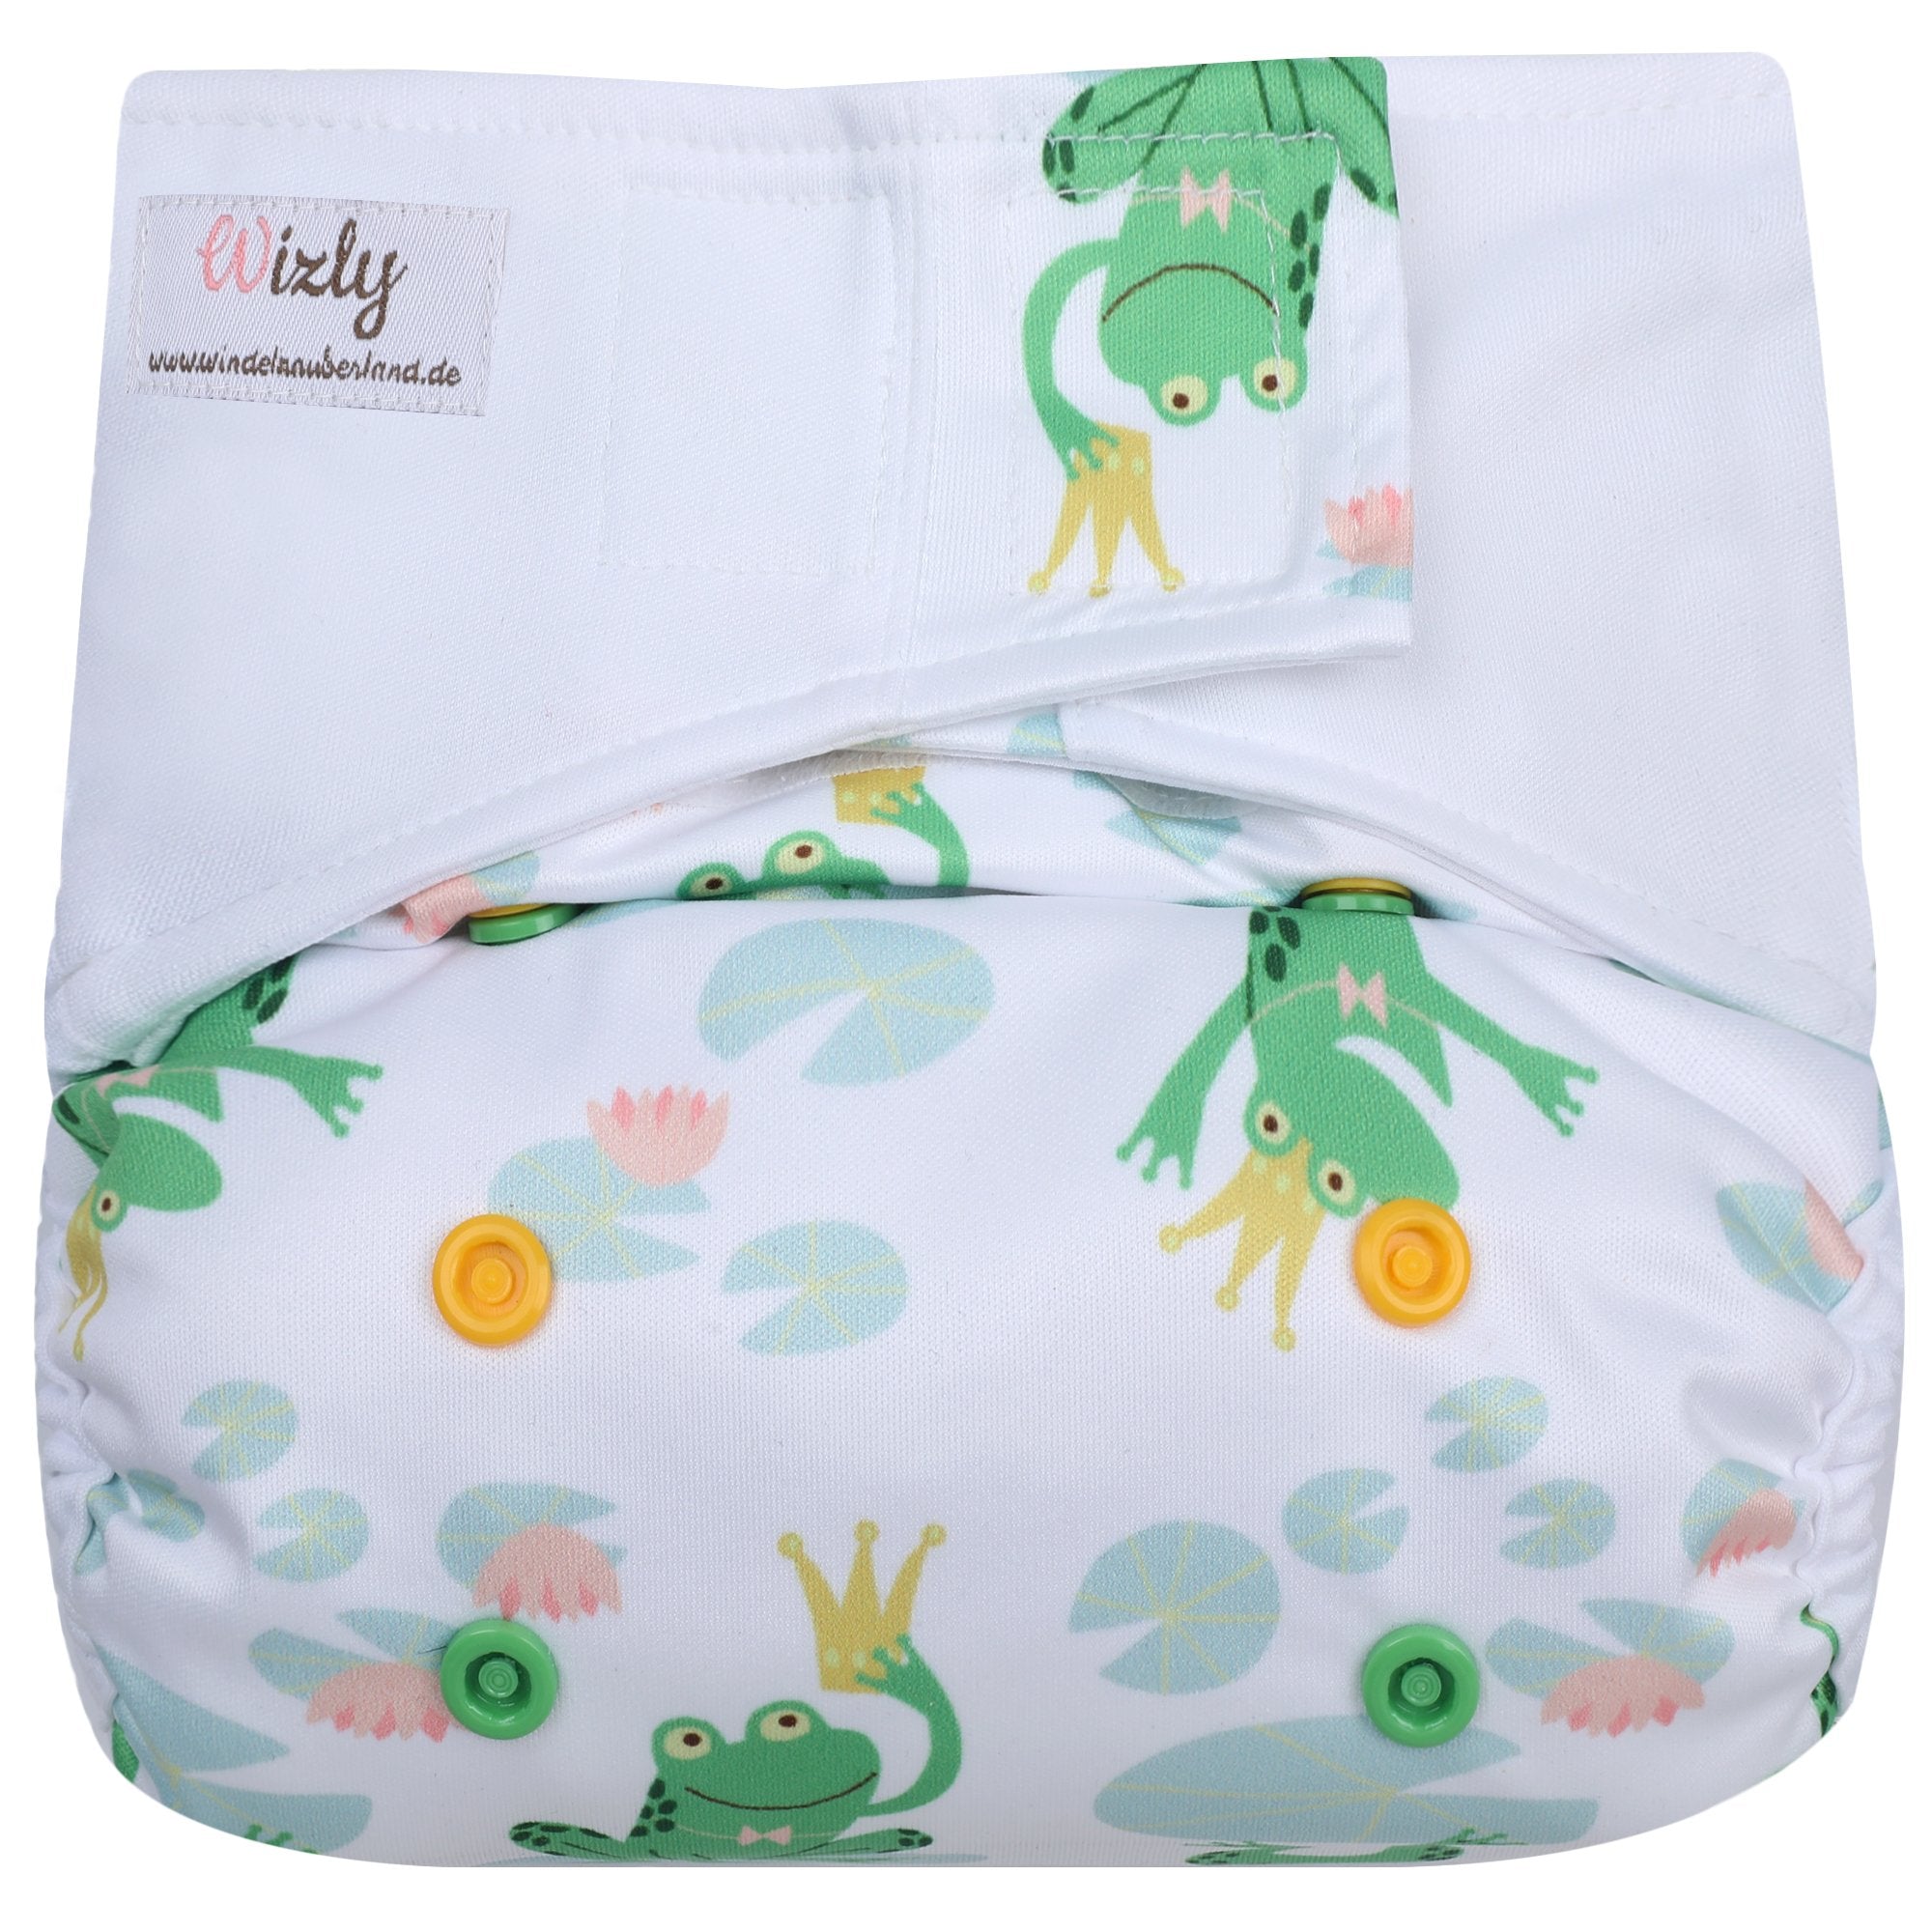 Wizly Diaper Magic Land Cover Pants 3-14 kg